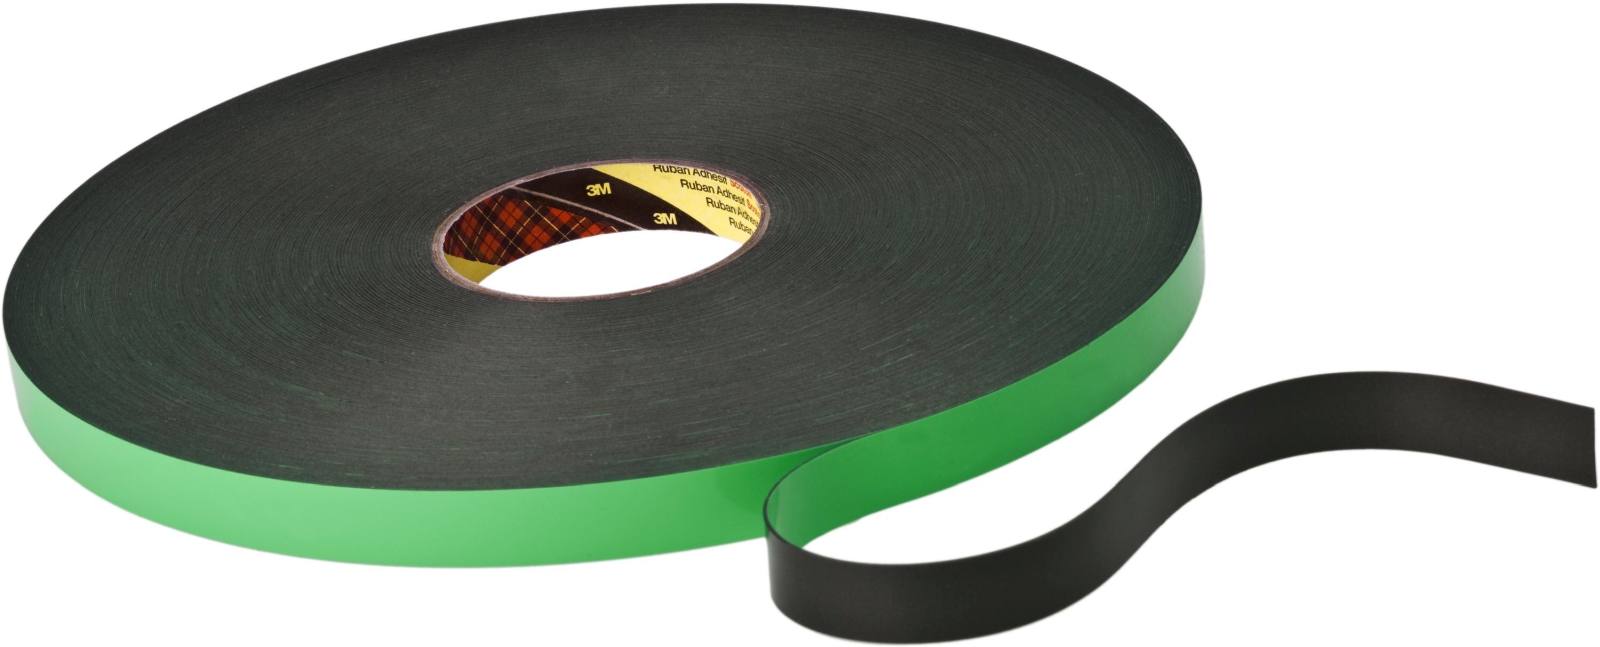 3M Double-sided PE foam tape with acrylic adhesive 9515B, black, 15 mm x 33 m, 1.5 mm